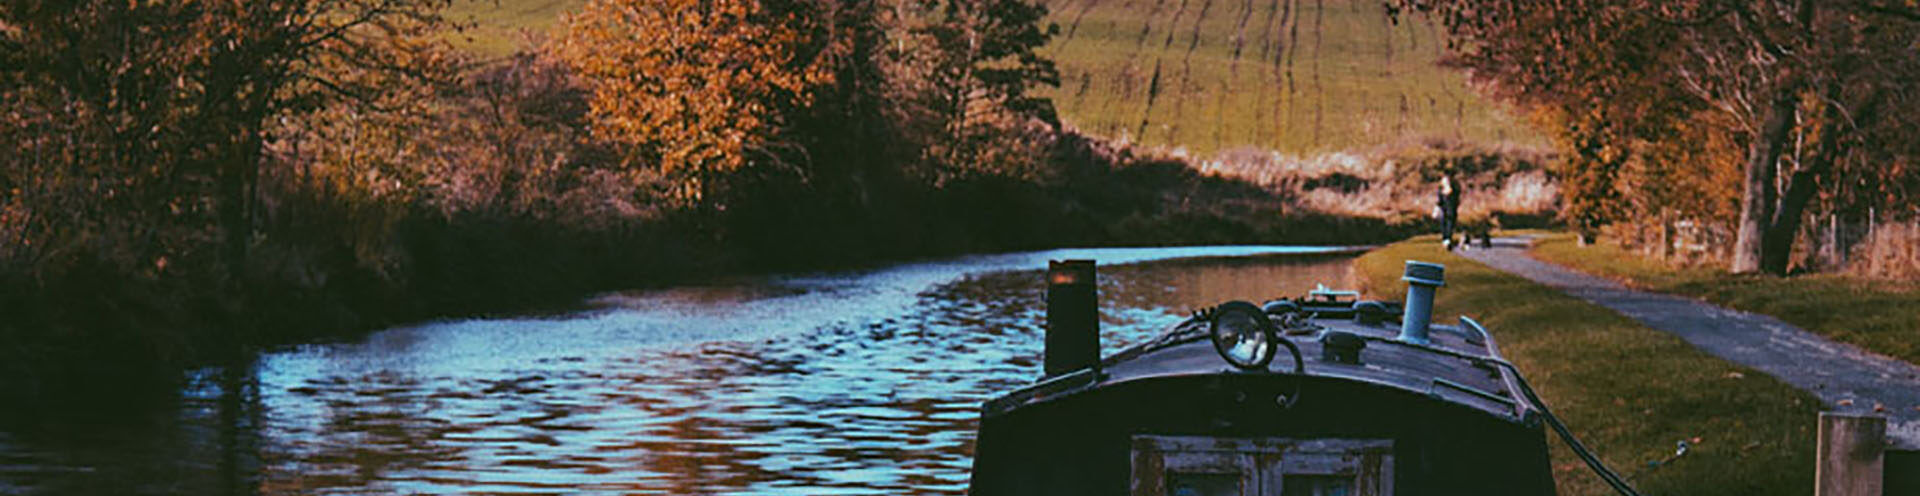 Image of a Cotswolds canal with a canal boat